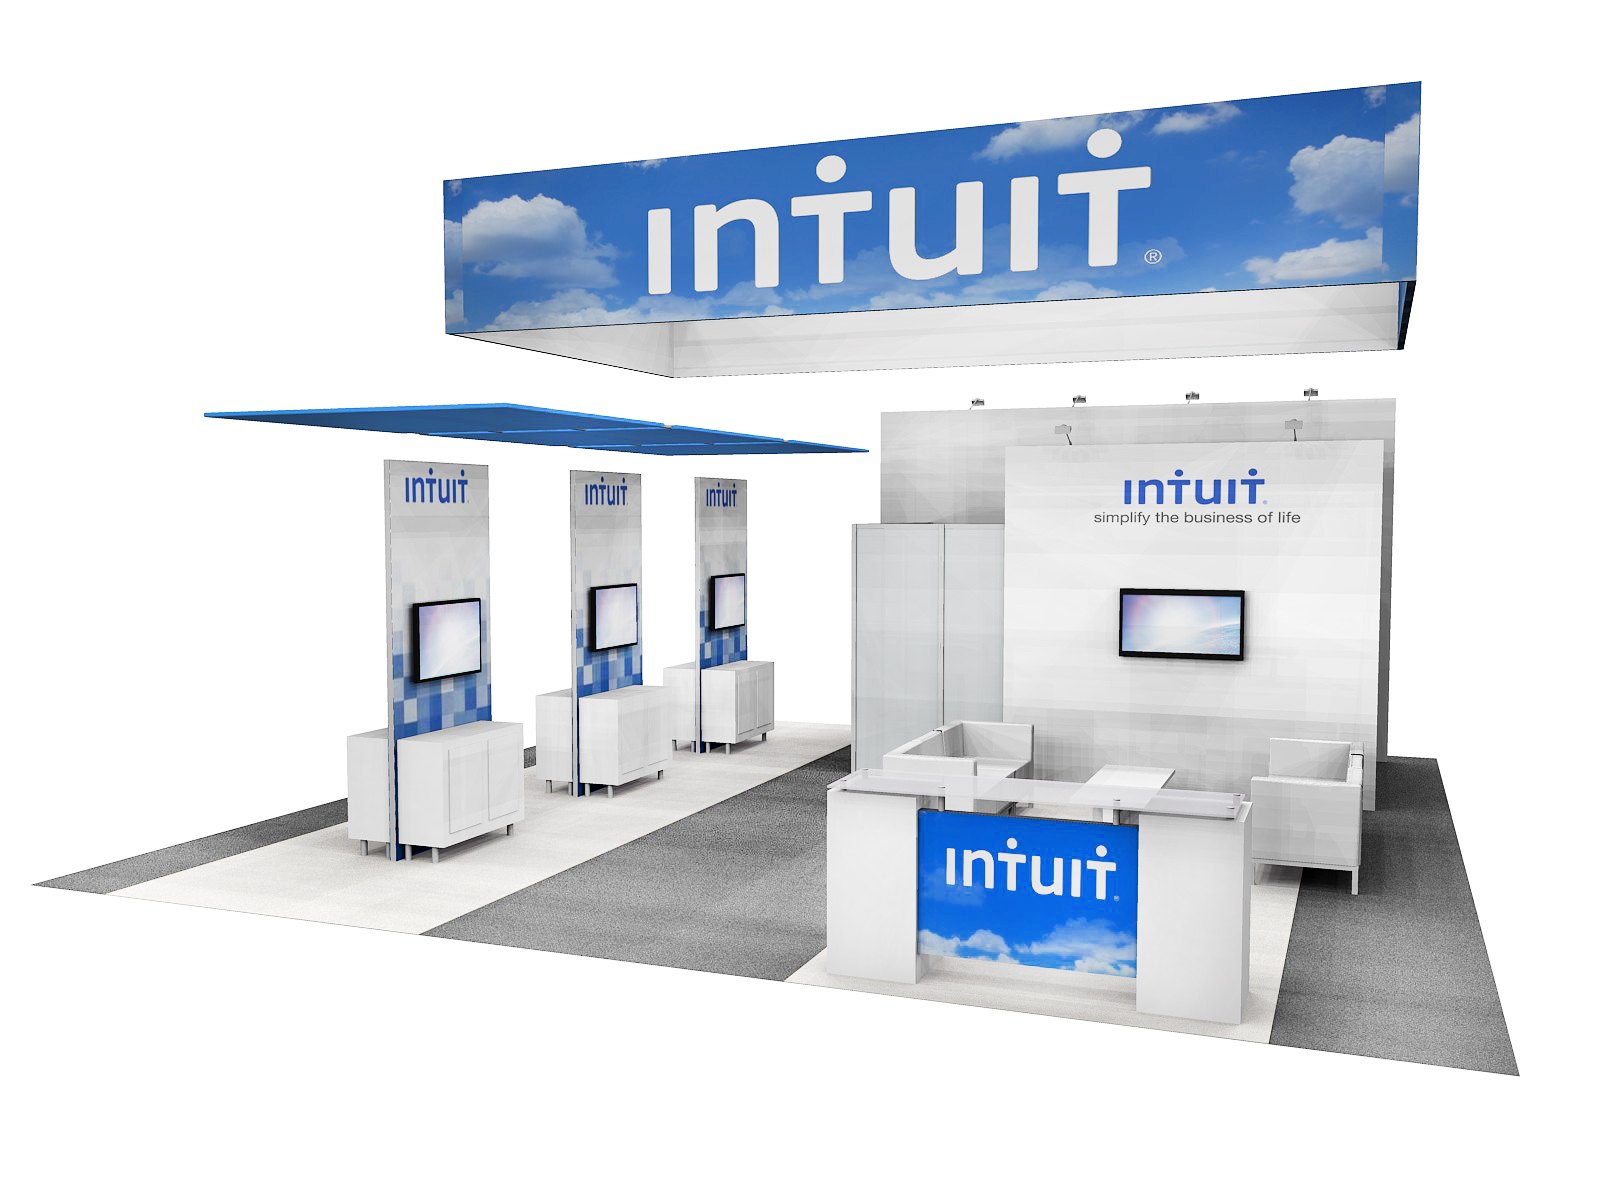 intuit trade show booth ideas to attract visitors